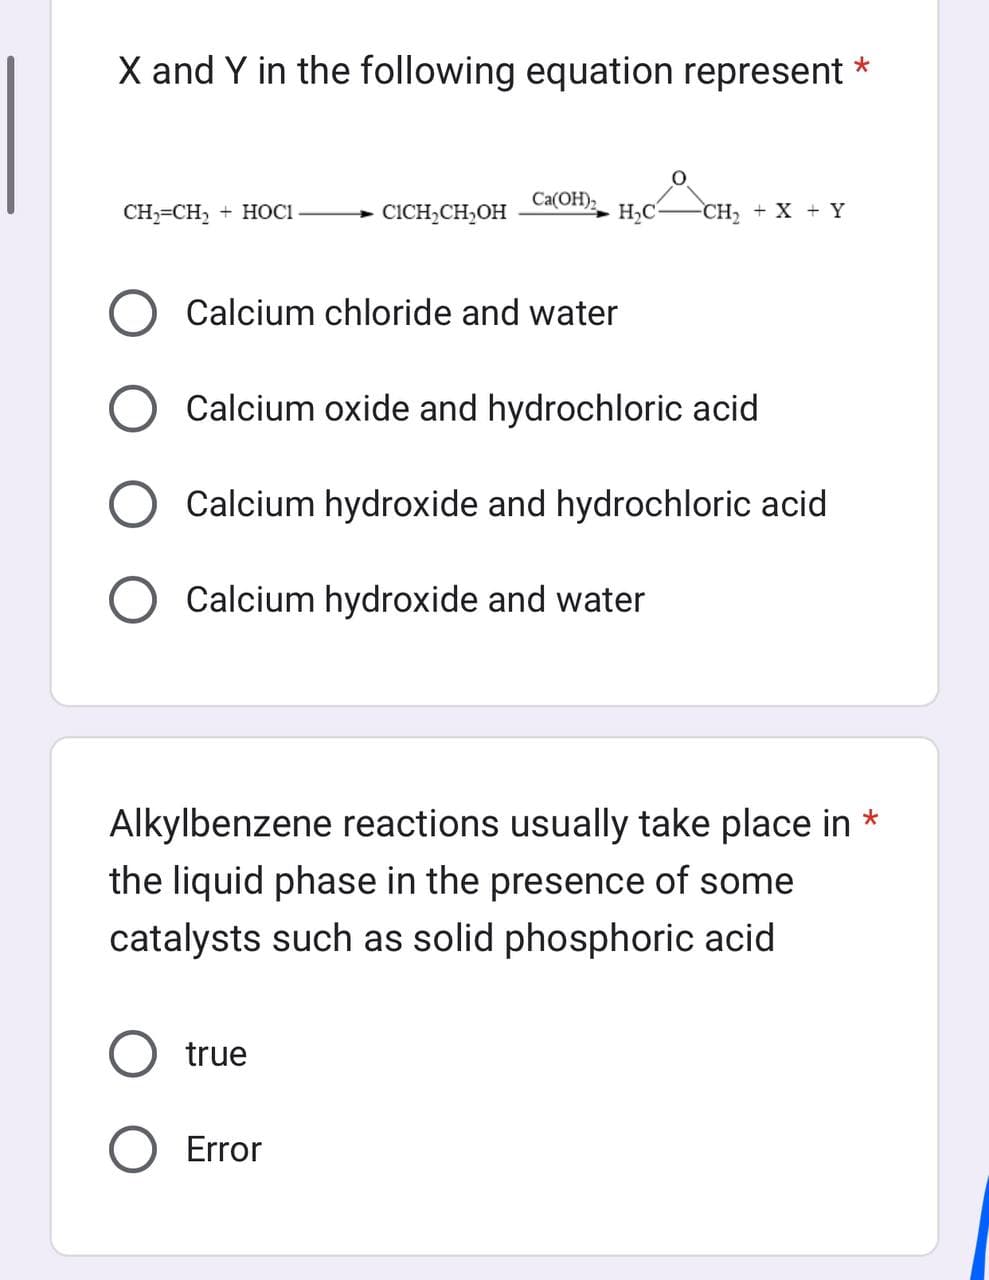 X and Y in the following equation represent *
CH₂=CH₂ + HOCI
Ca(OH)2
Calcium chloride and water
CICH₂CH₂OH H₂CH.
Calcium oxide and hydrochloric acid
Calcium hydroxide and hydrochloric acid
O Calcium hydroxide and water
true
Error
CH₂ + X + Y
Alkylbenzene reactions usually take place in *
the liquid phase in the presence of some
catalysts such as solid phosphoric acid